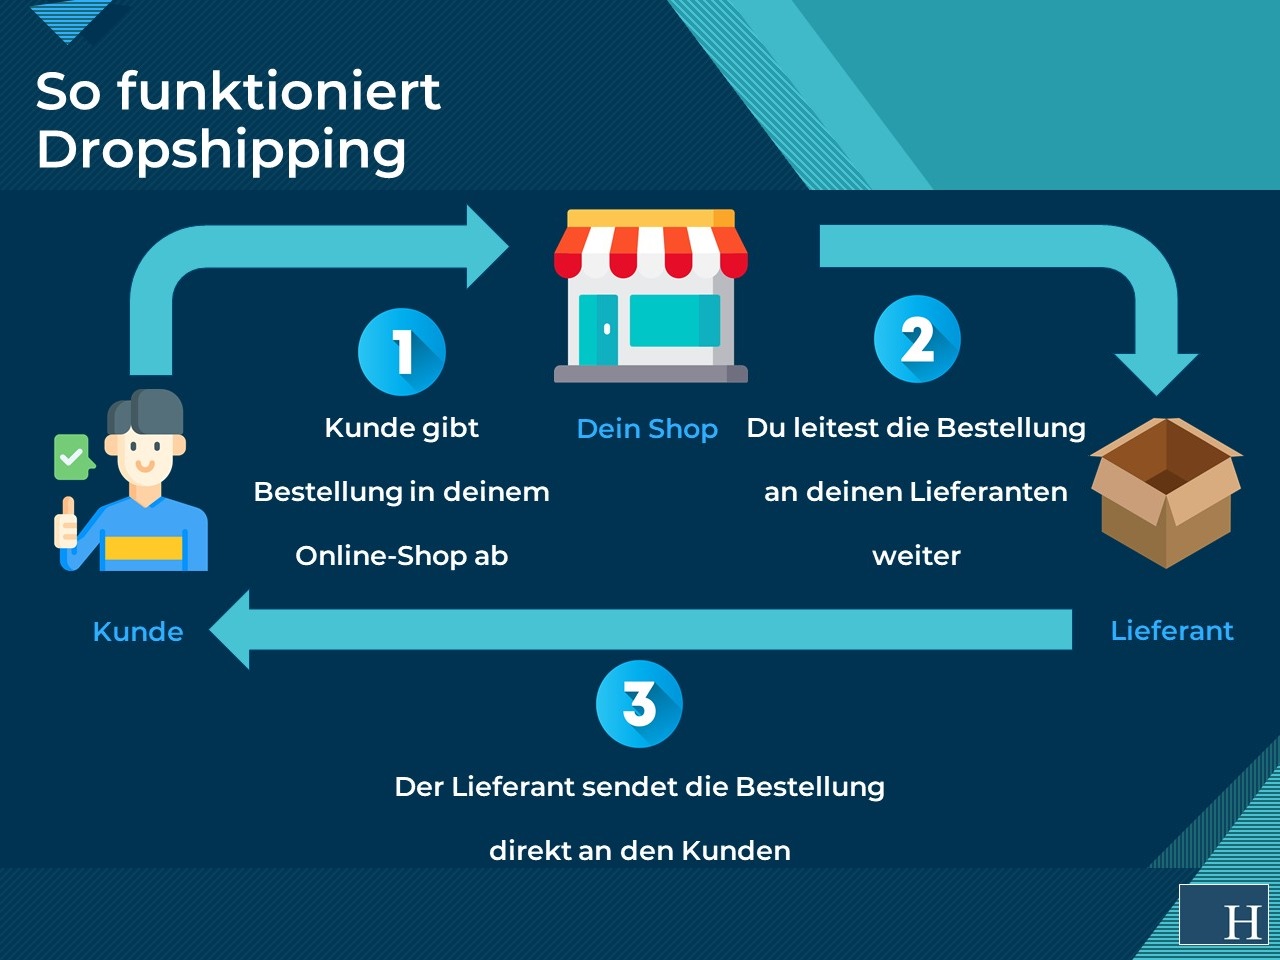 So funktioniert Dropshipping